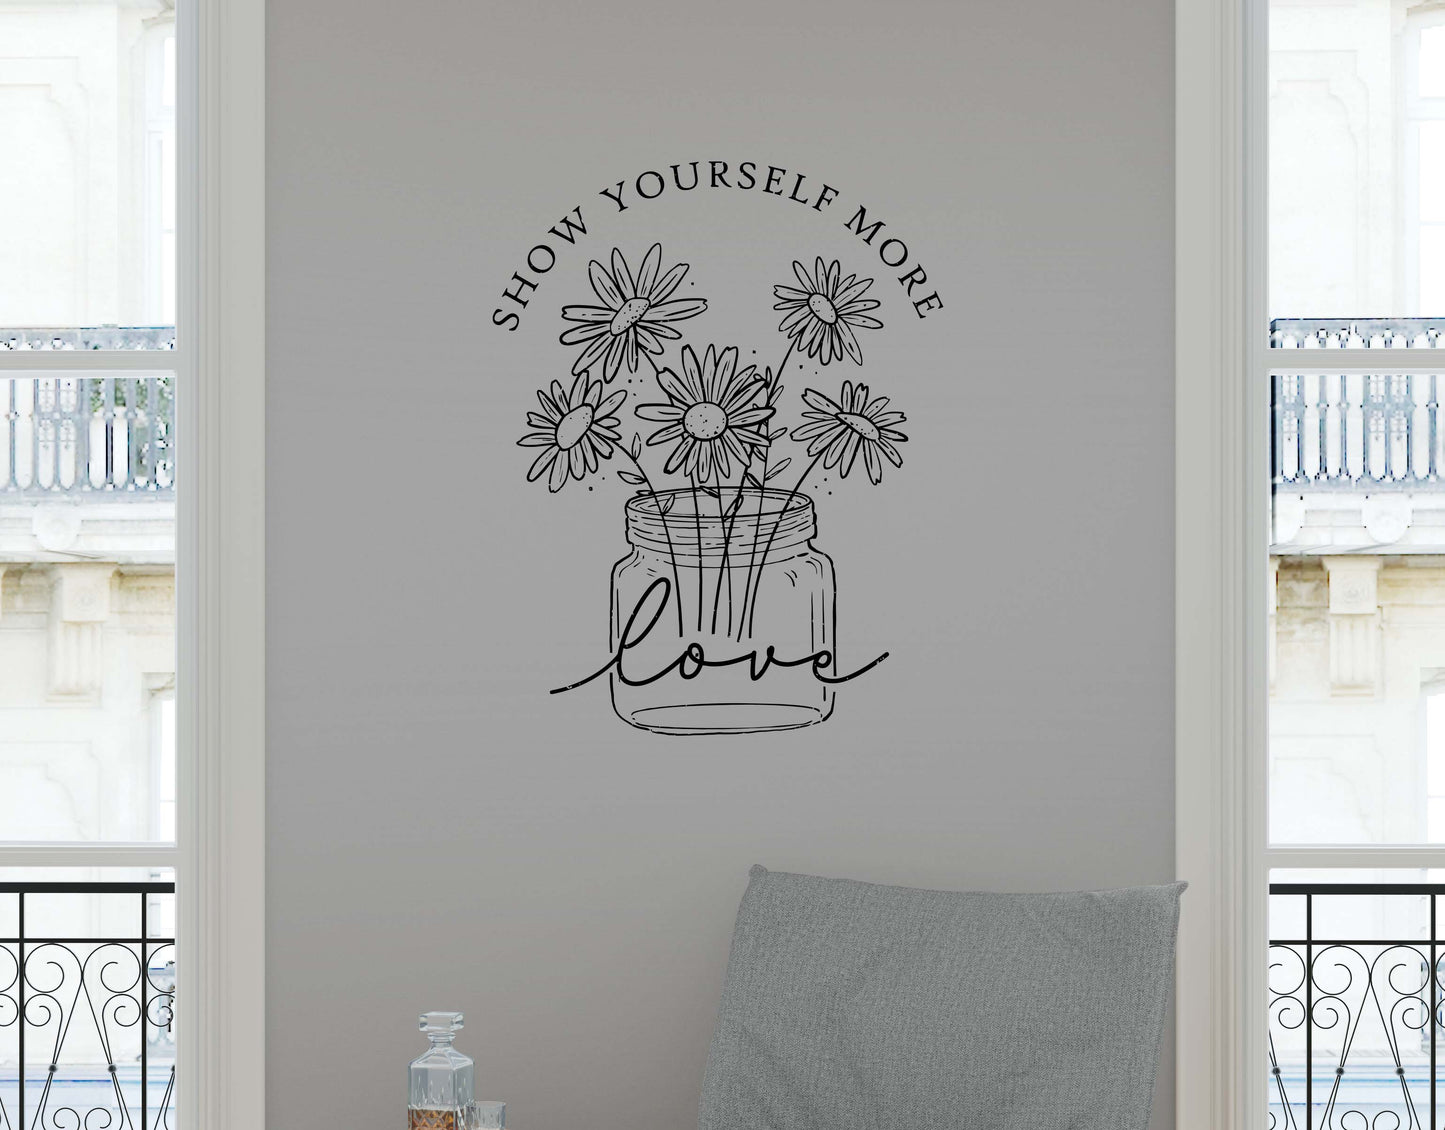 Motivational Quote, Show Yourself More Love Phrase. Affirmation, Self-Care, Self-Esteem Quote Wall Decal Sticker. #6555